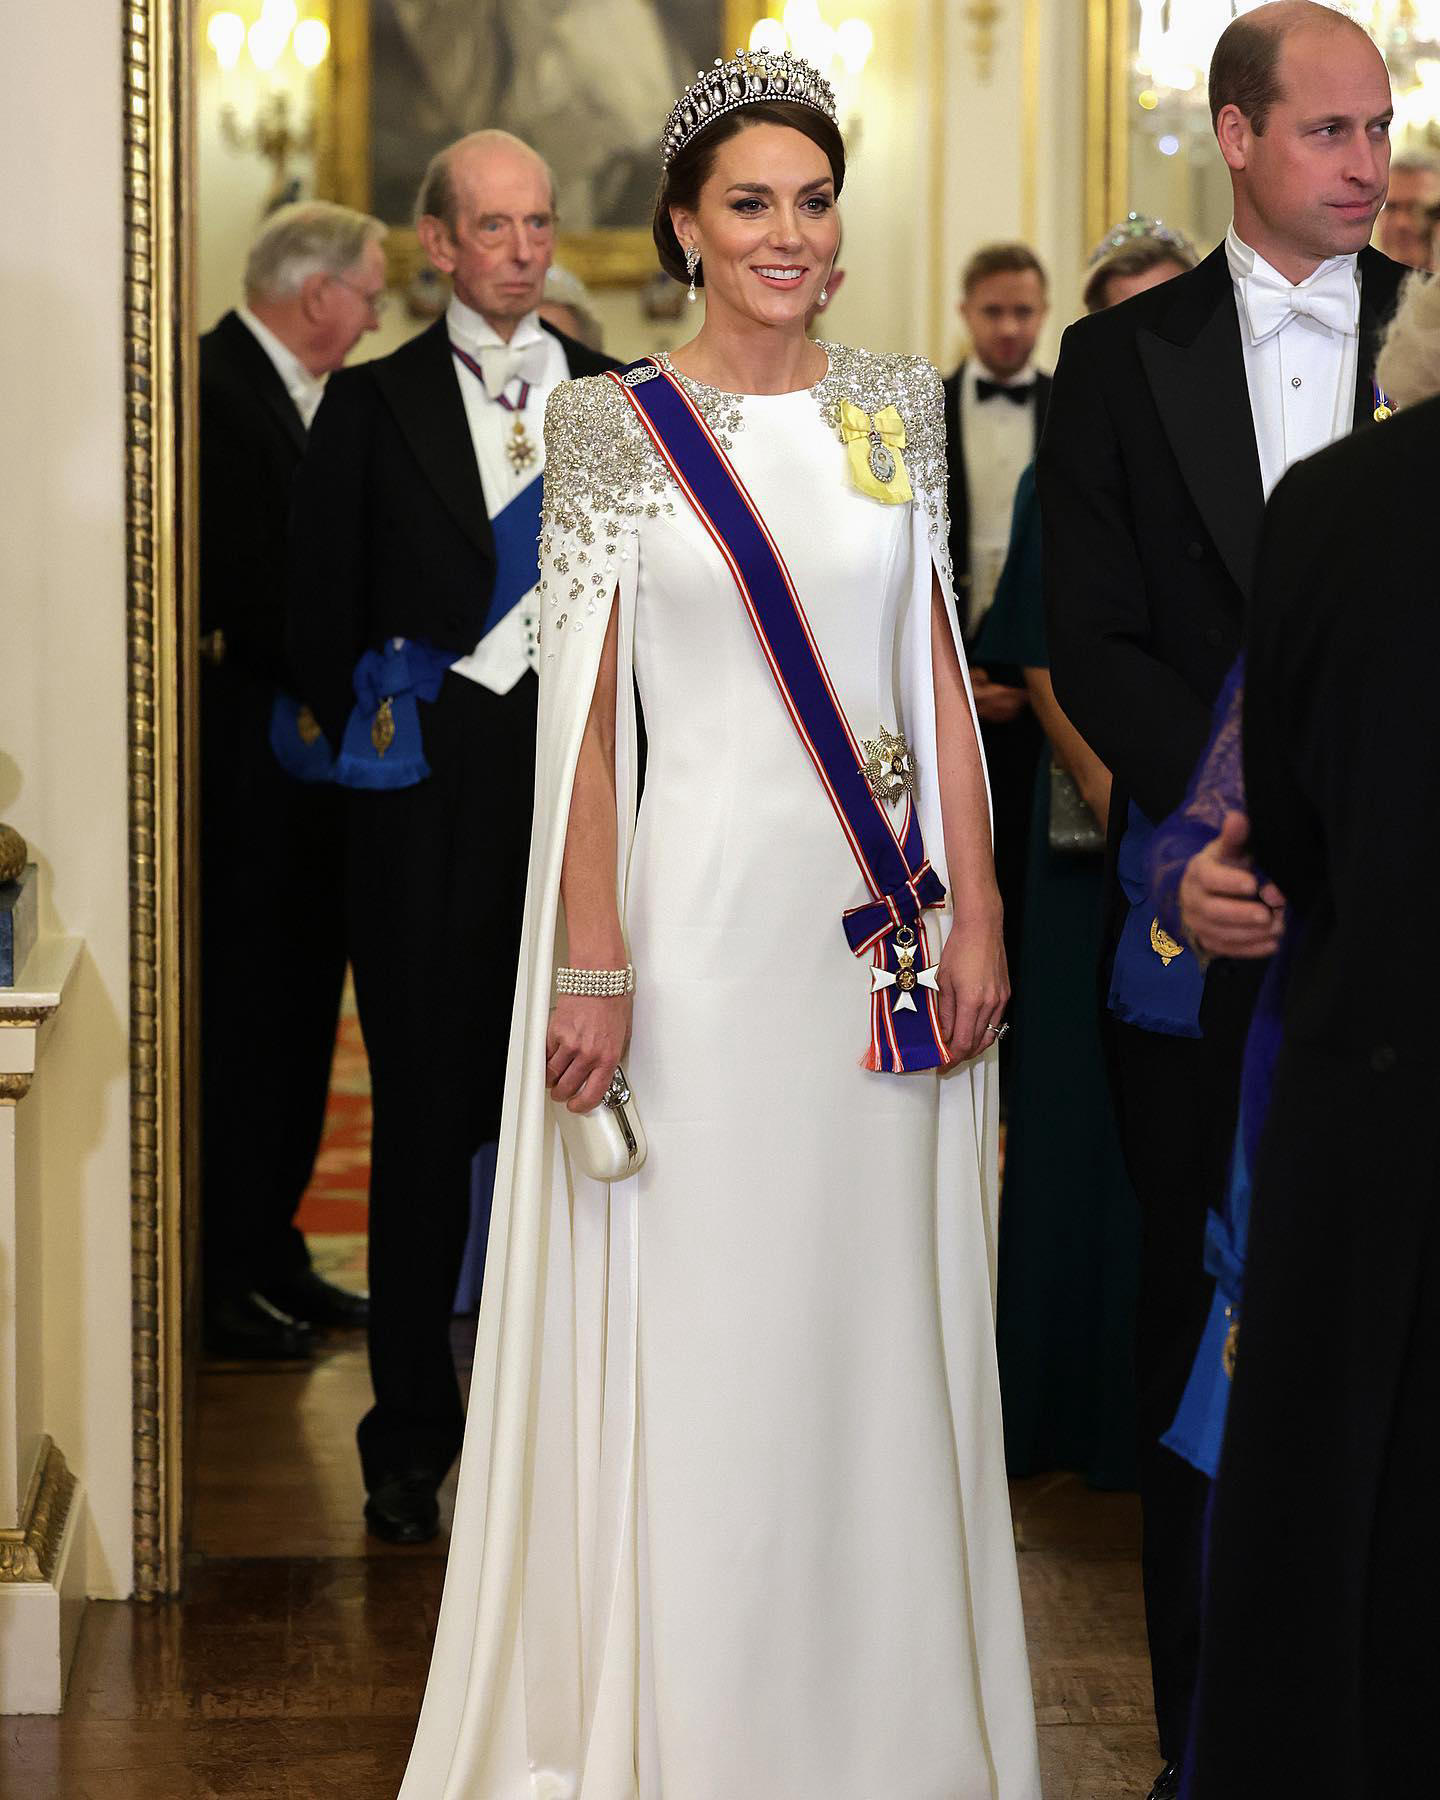 Just Jared - Catherine, Princess of Wales (aka Kate Middleton) wore a tiara for the first time in ne